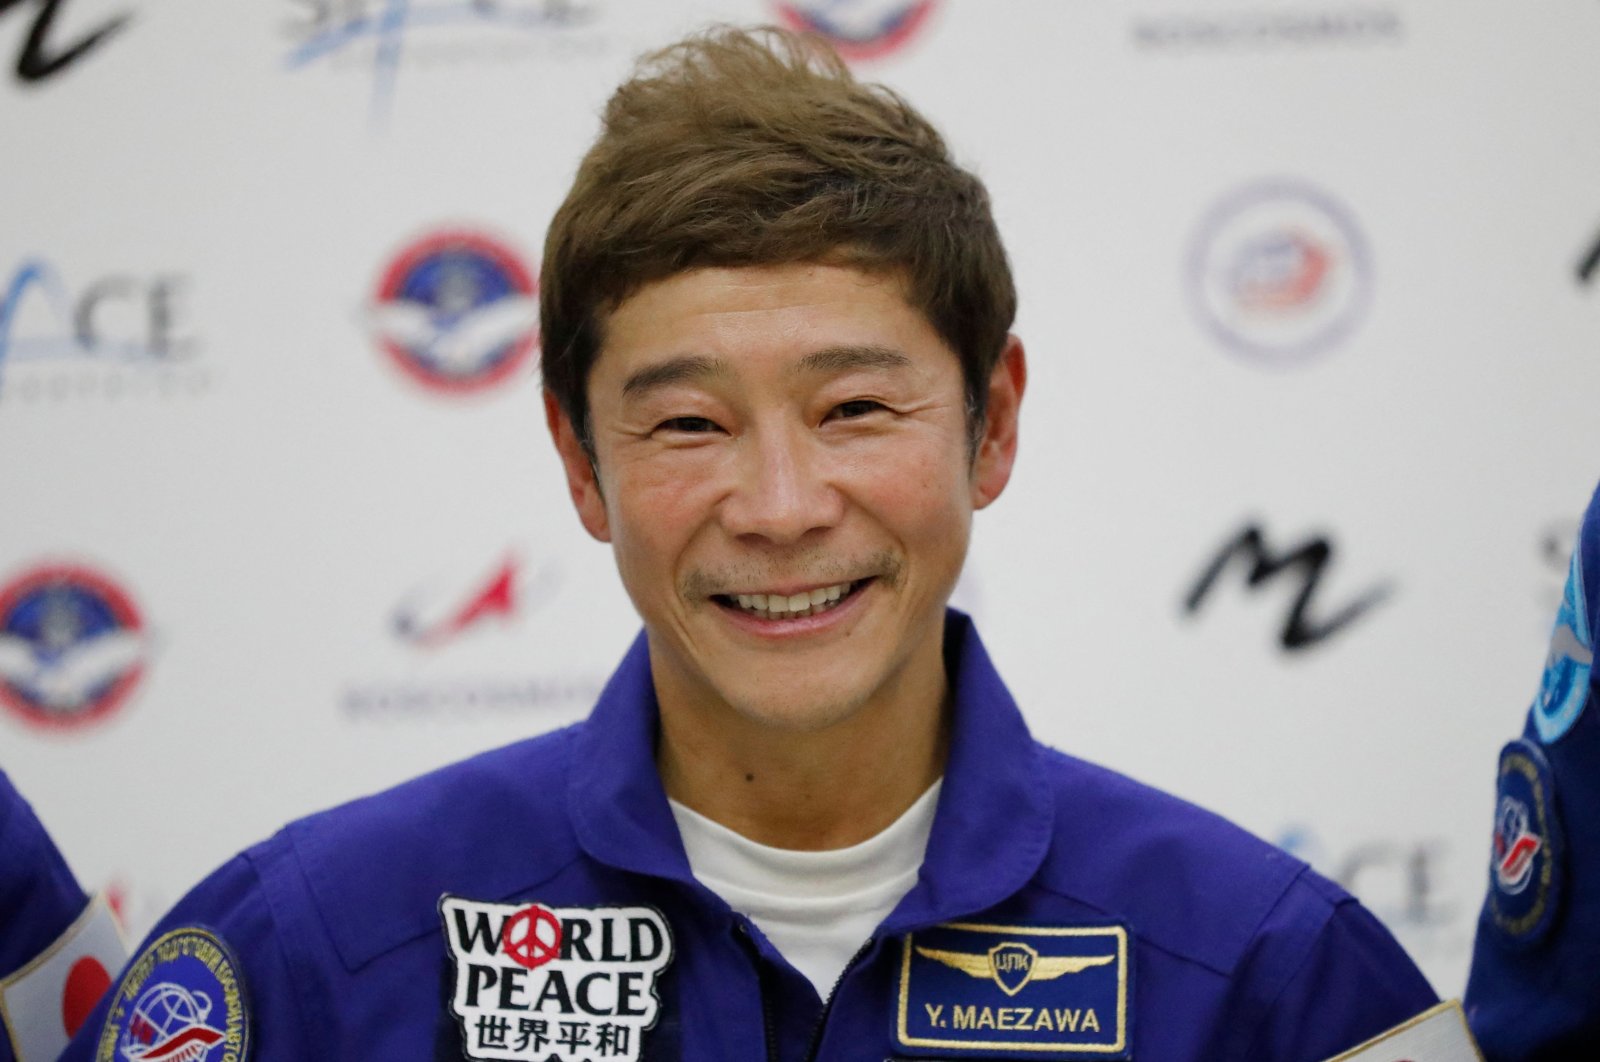 Space flight participant, Japanese billionaire Yusaku Maezawa attends a press conference ahead of the expedition to the International Space Station, in Star City outside Moscow, Russia, Oct. 14, 2021. (AFP Photo)